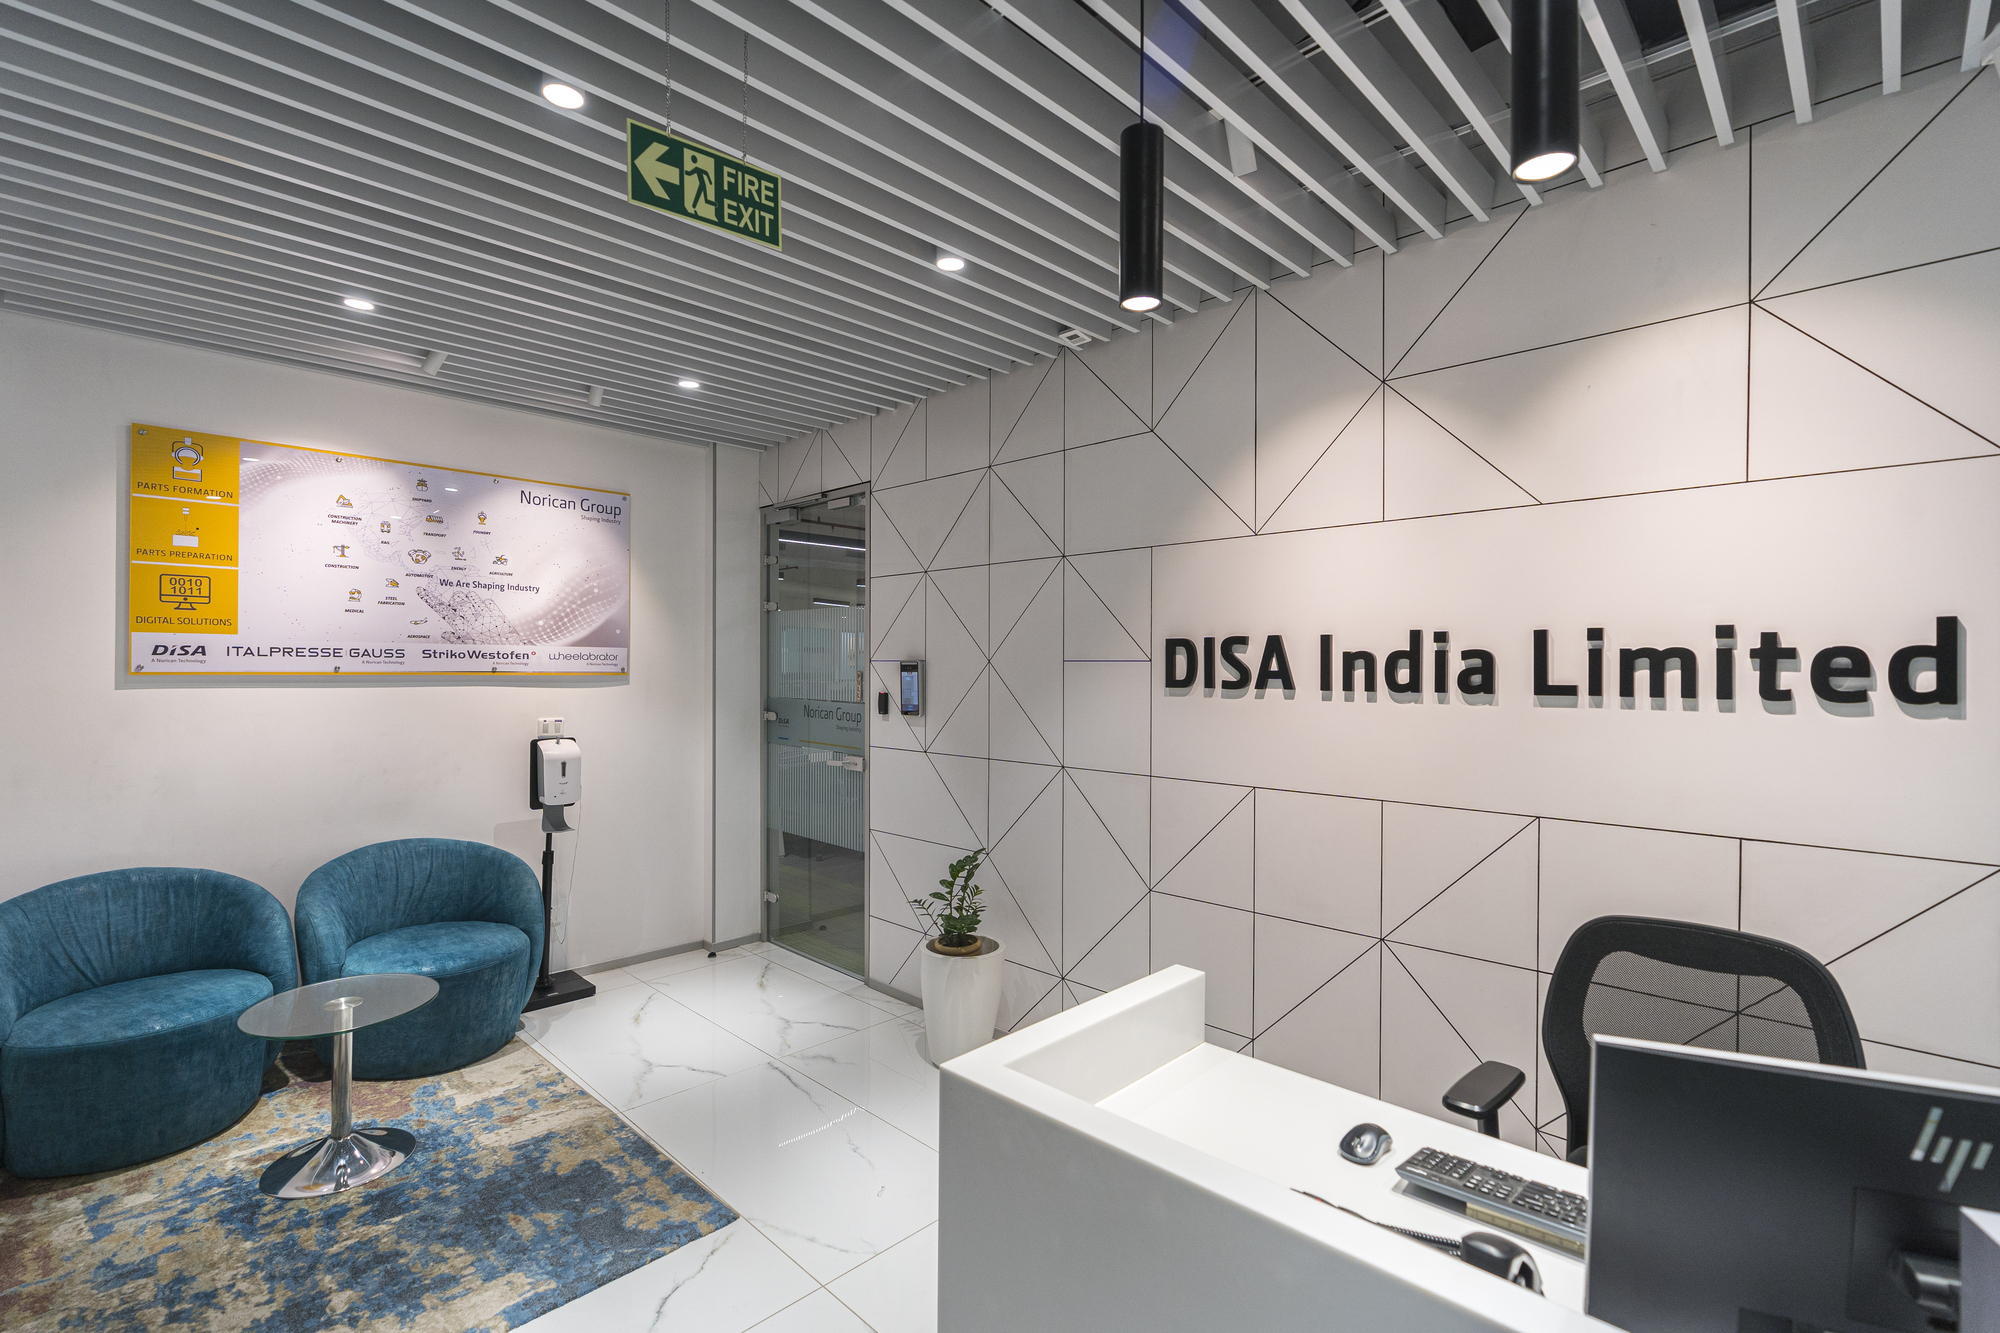 DISA India Limited